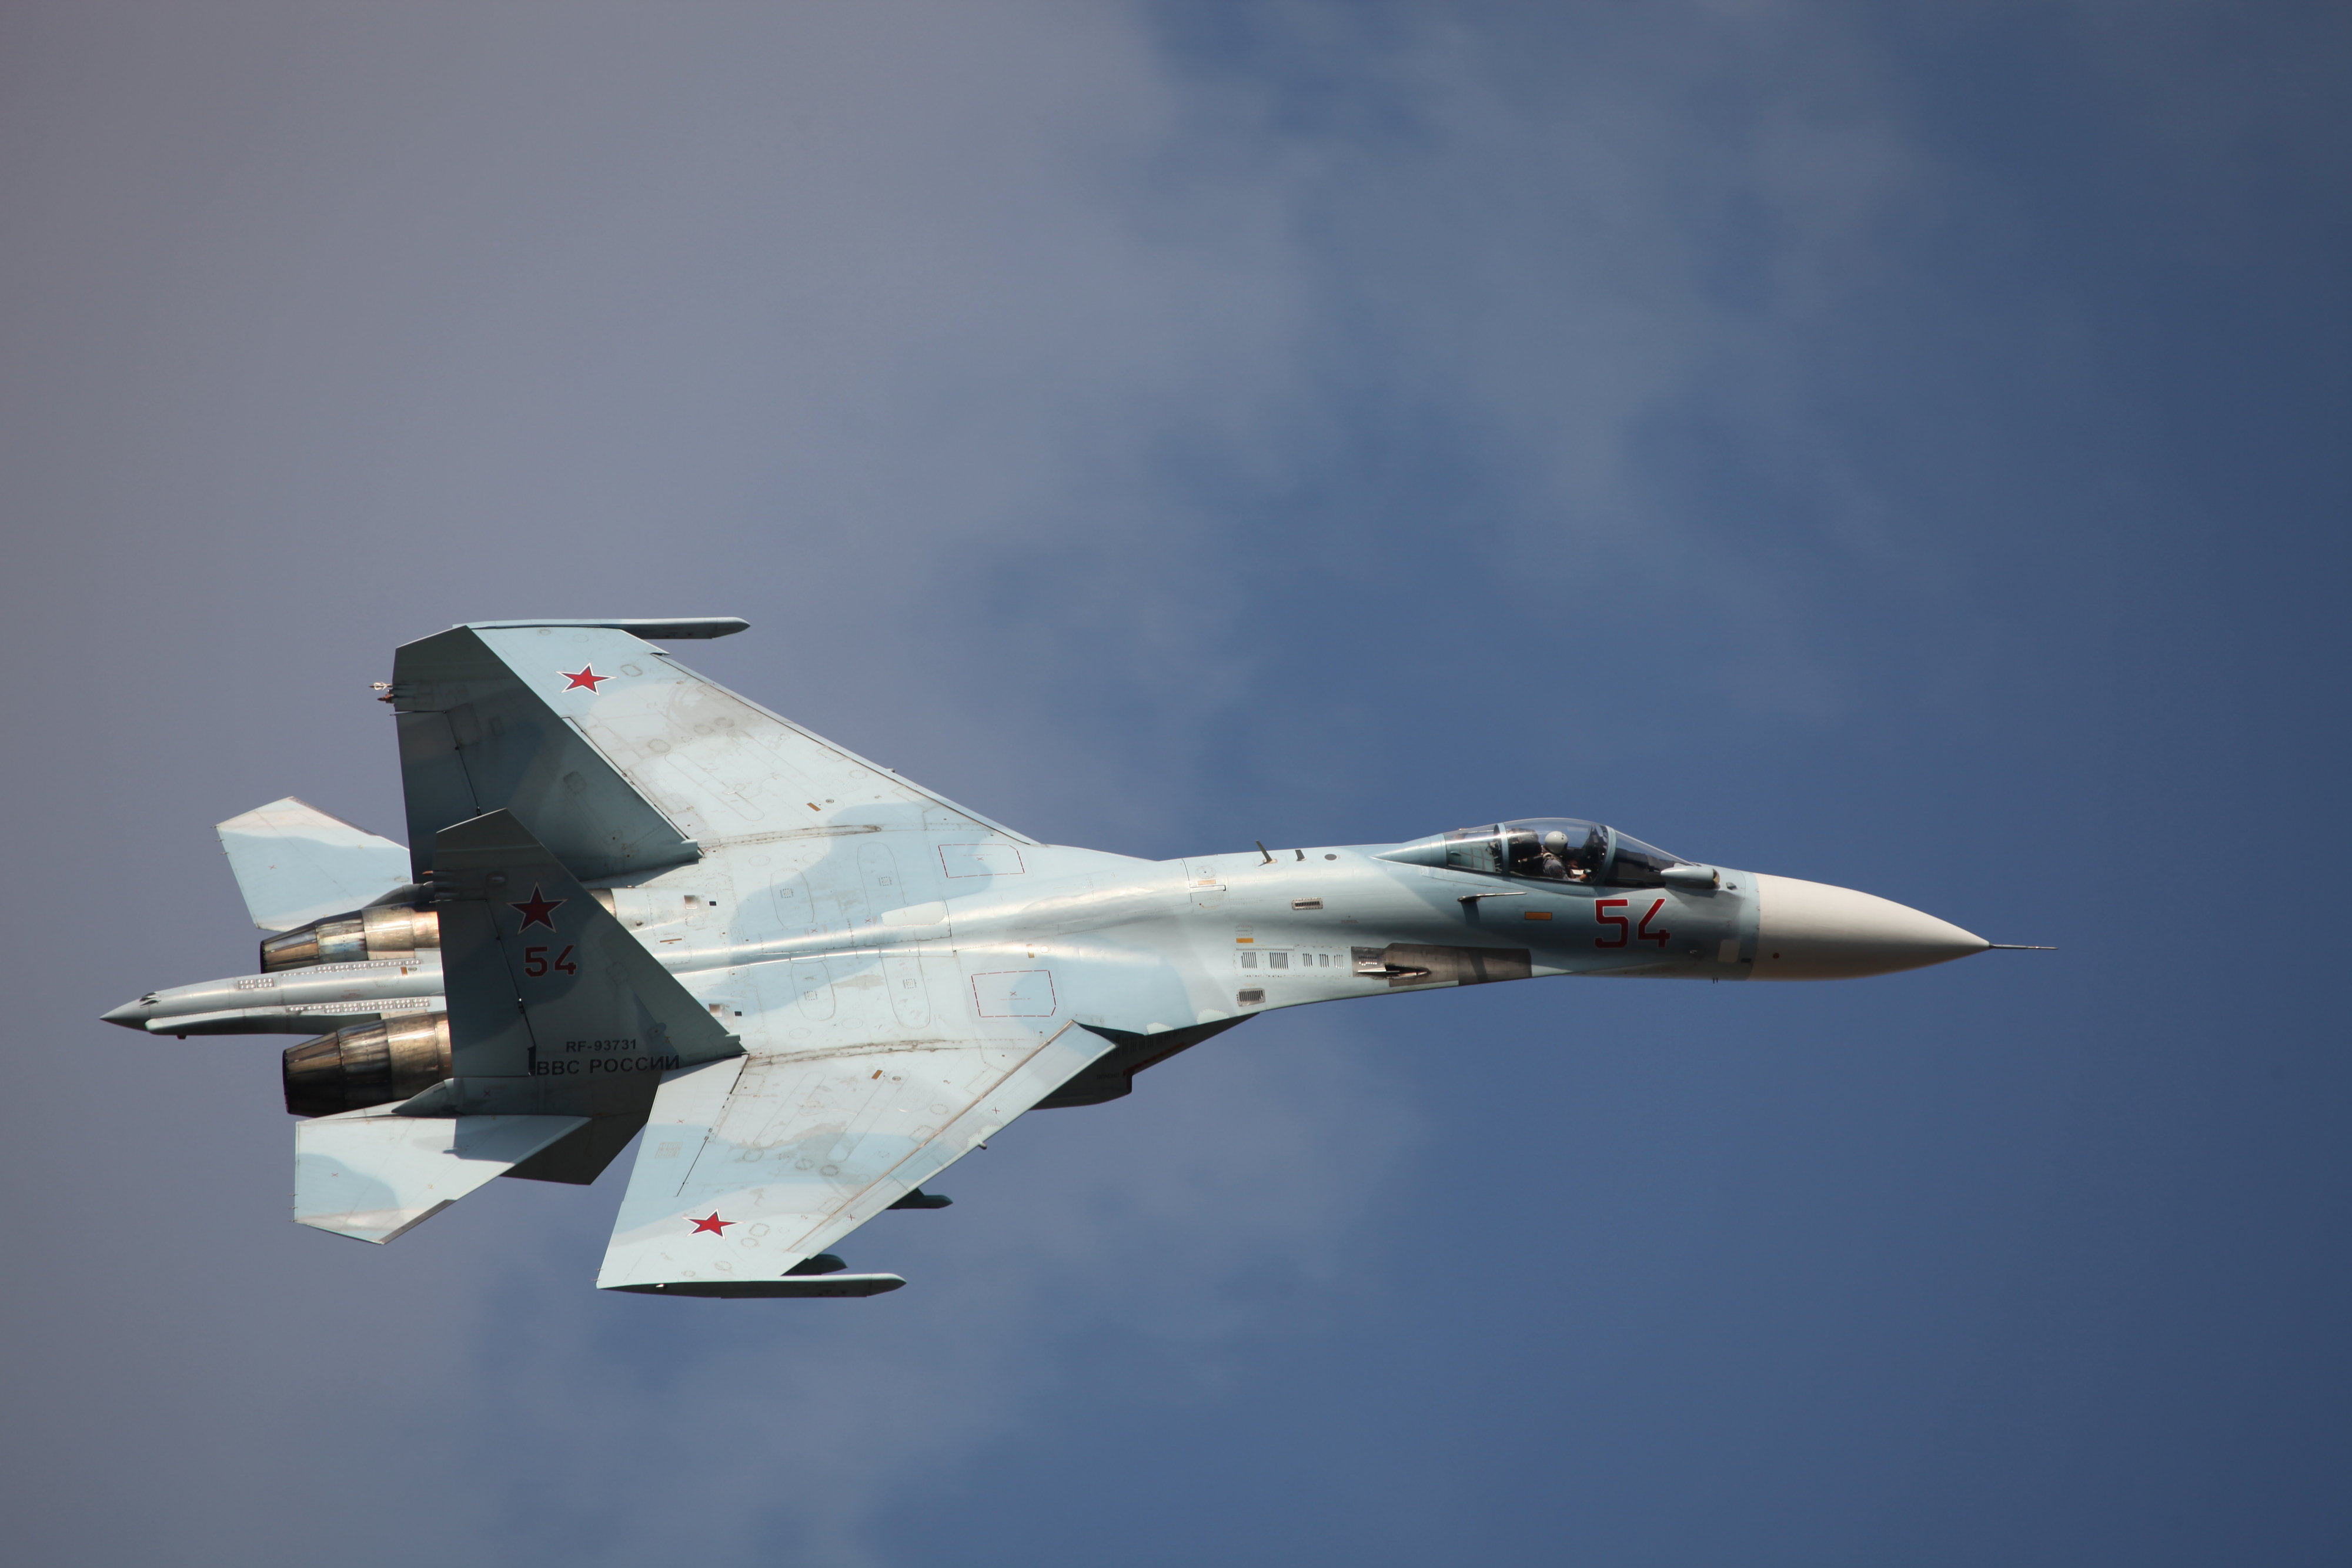 SU-35 is the latest model of SU-27 with more advance, powerful engine & radar